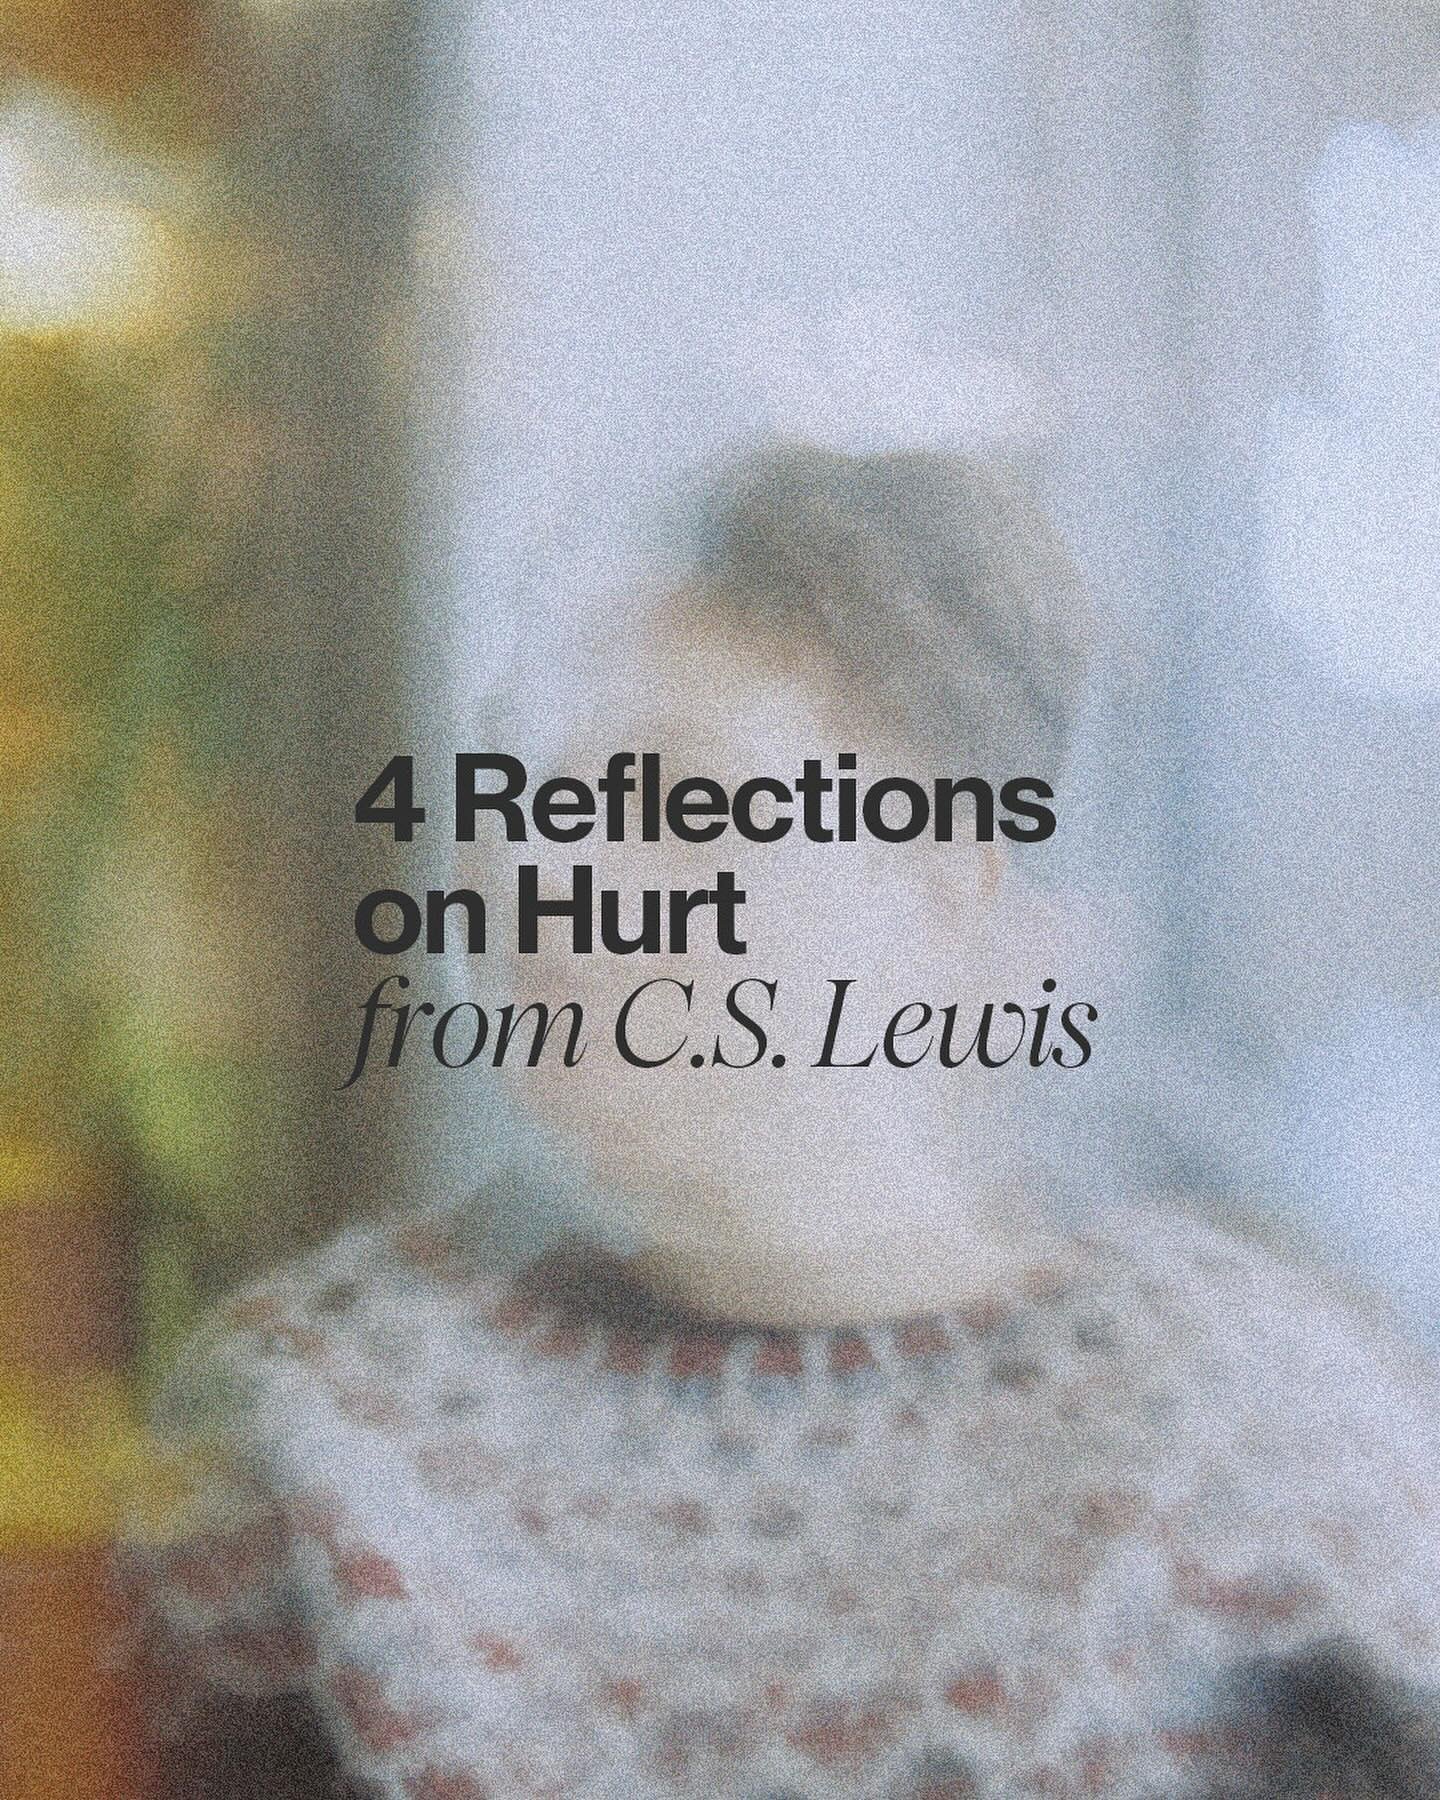 This past Sunday @spenceshelton joined us to talk about pain and hurt from the lens of Psalm 42. During his teaching, Spence mentioned a quote from C.S. Lewis &mdash; a man well acquainted with hurt and pain.

Here are 4 reflections from Lewis&rsquo;